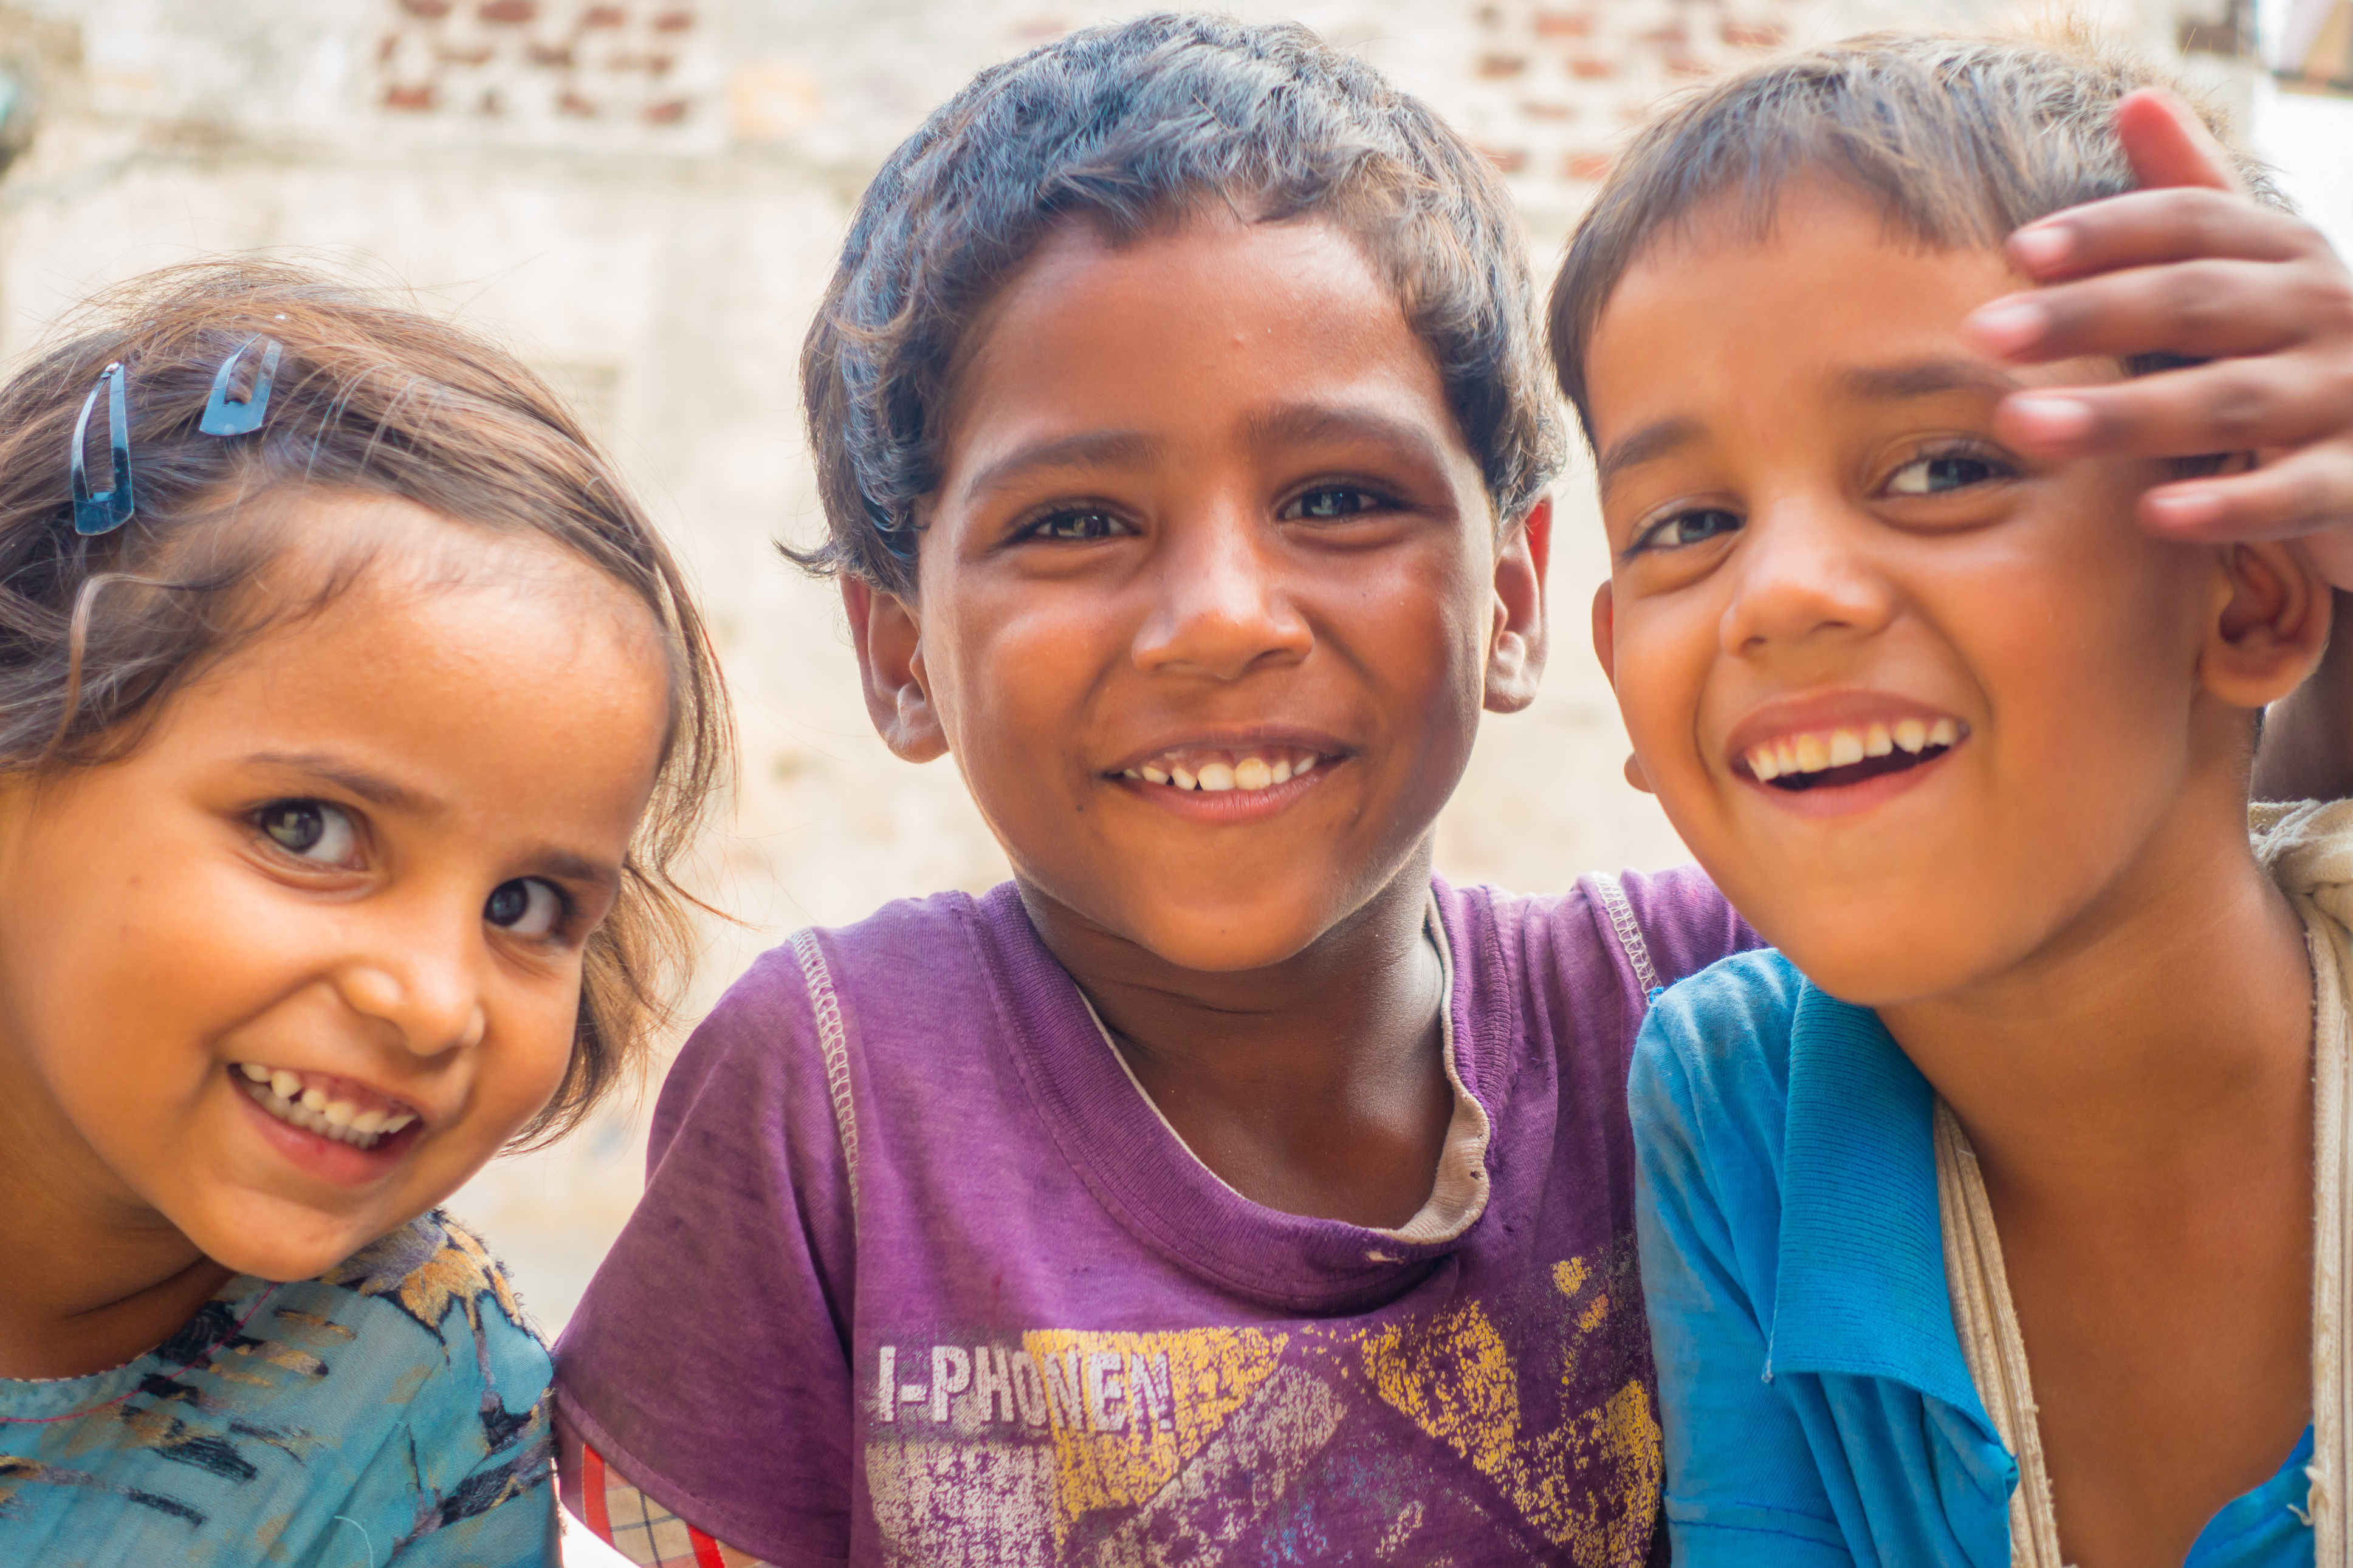 The happy classroom: Insights from our study of schools in Delhi, India